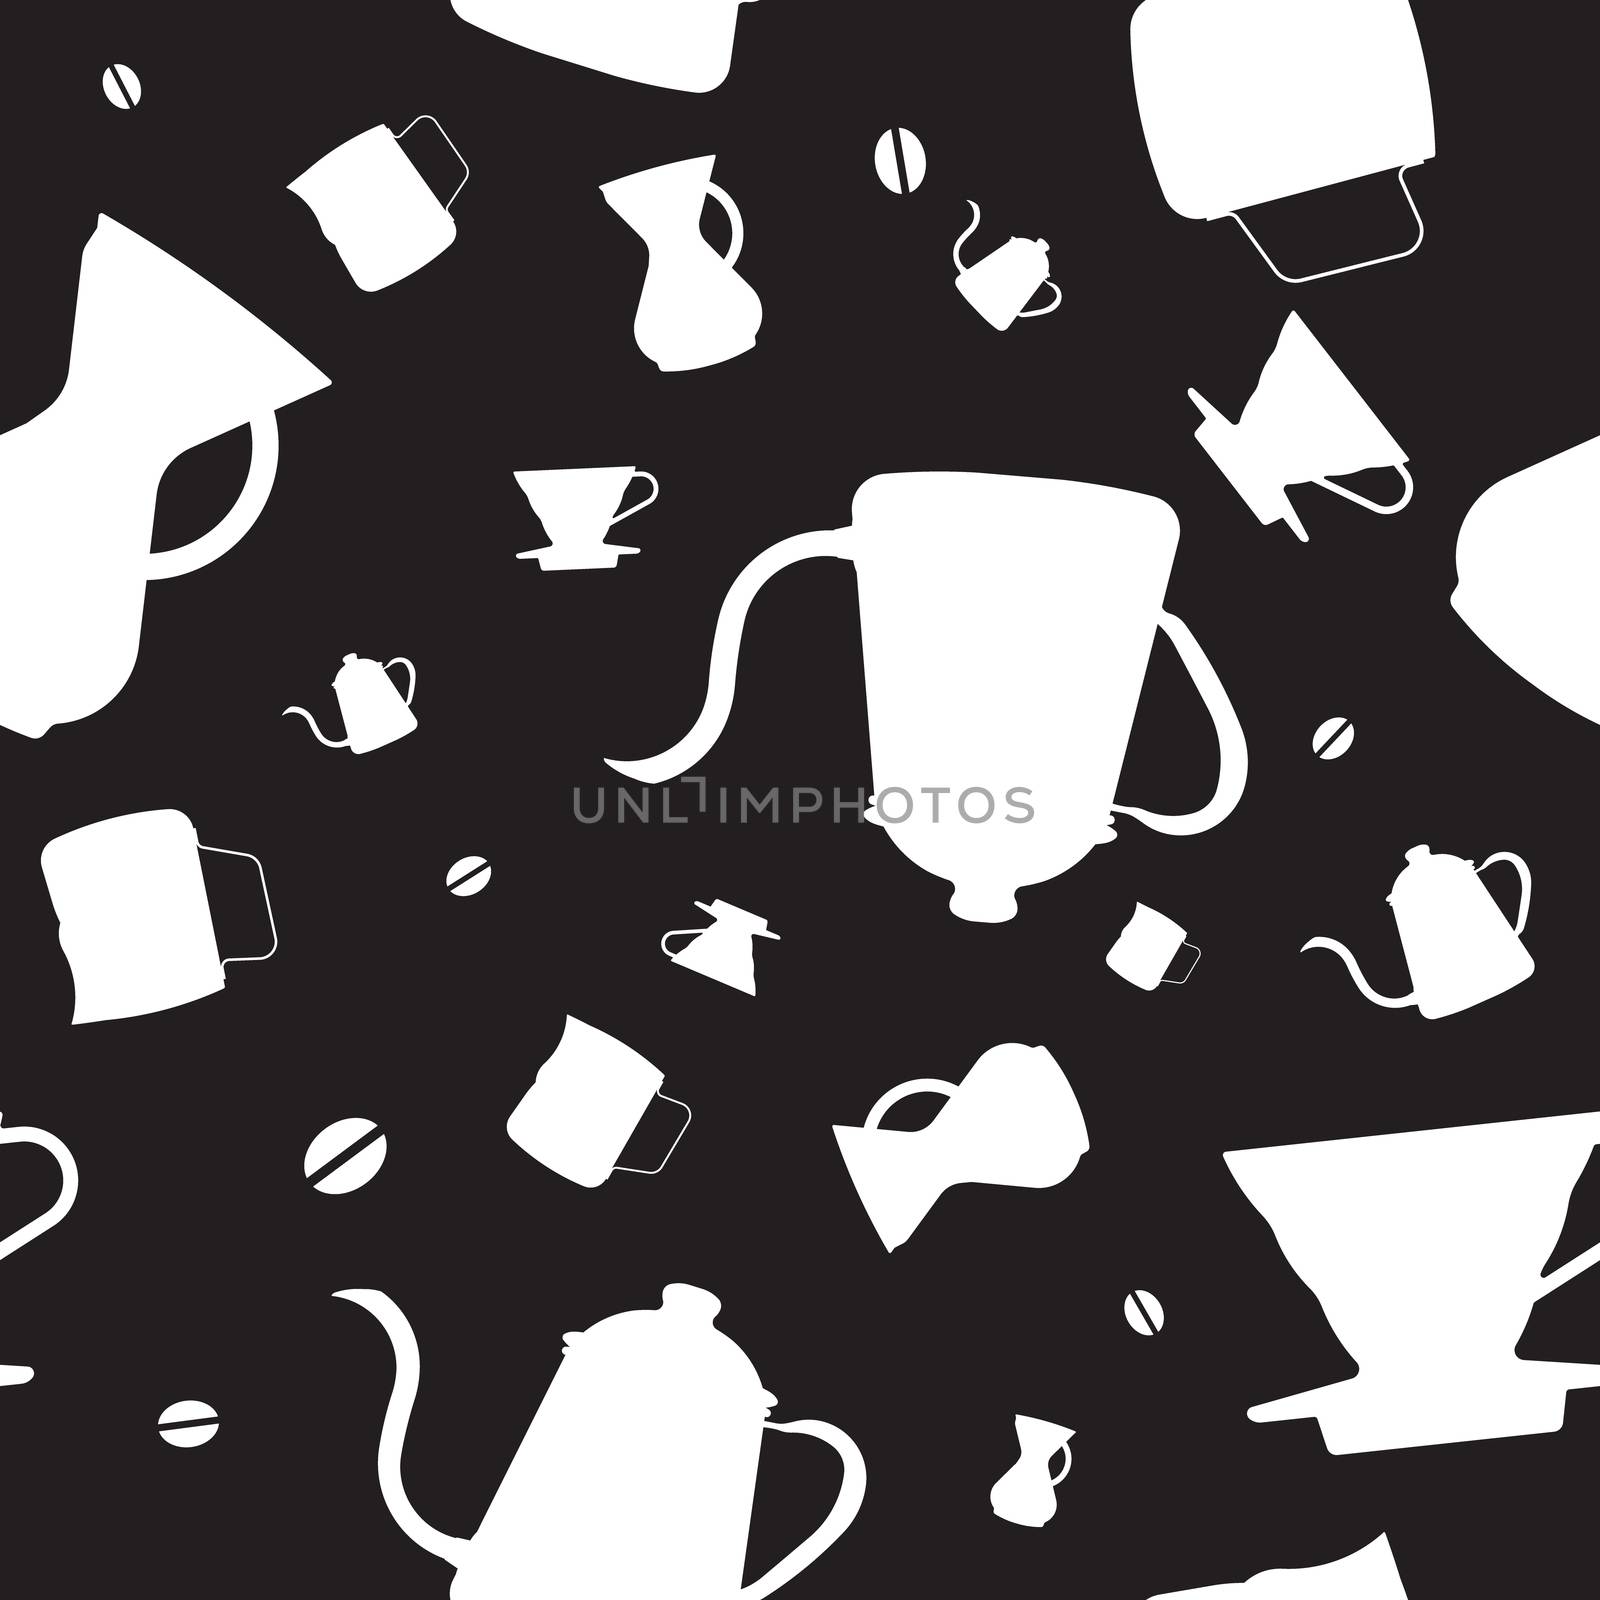 White silhouette flat design icons, Pour over drip coffee makers, goose neck kettles, chemex, coffee beans, and pitcher are illustrated randomly to be seamless graphic pattern.